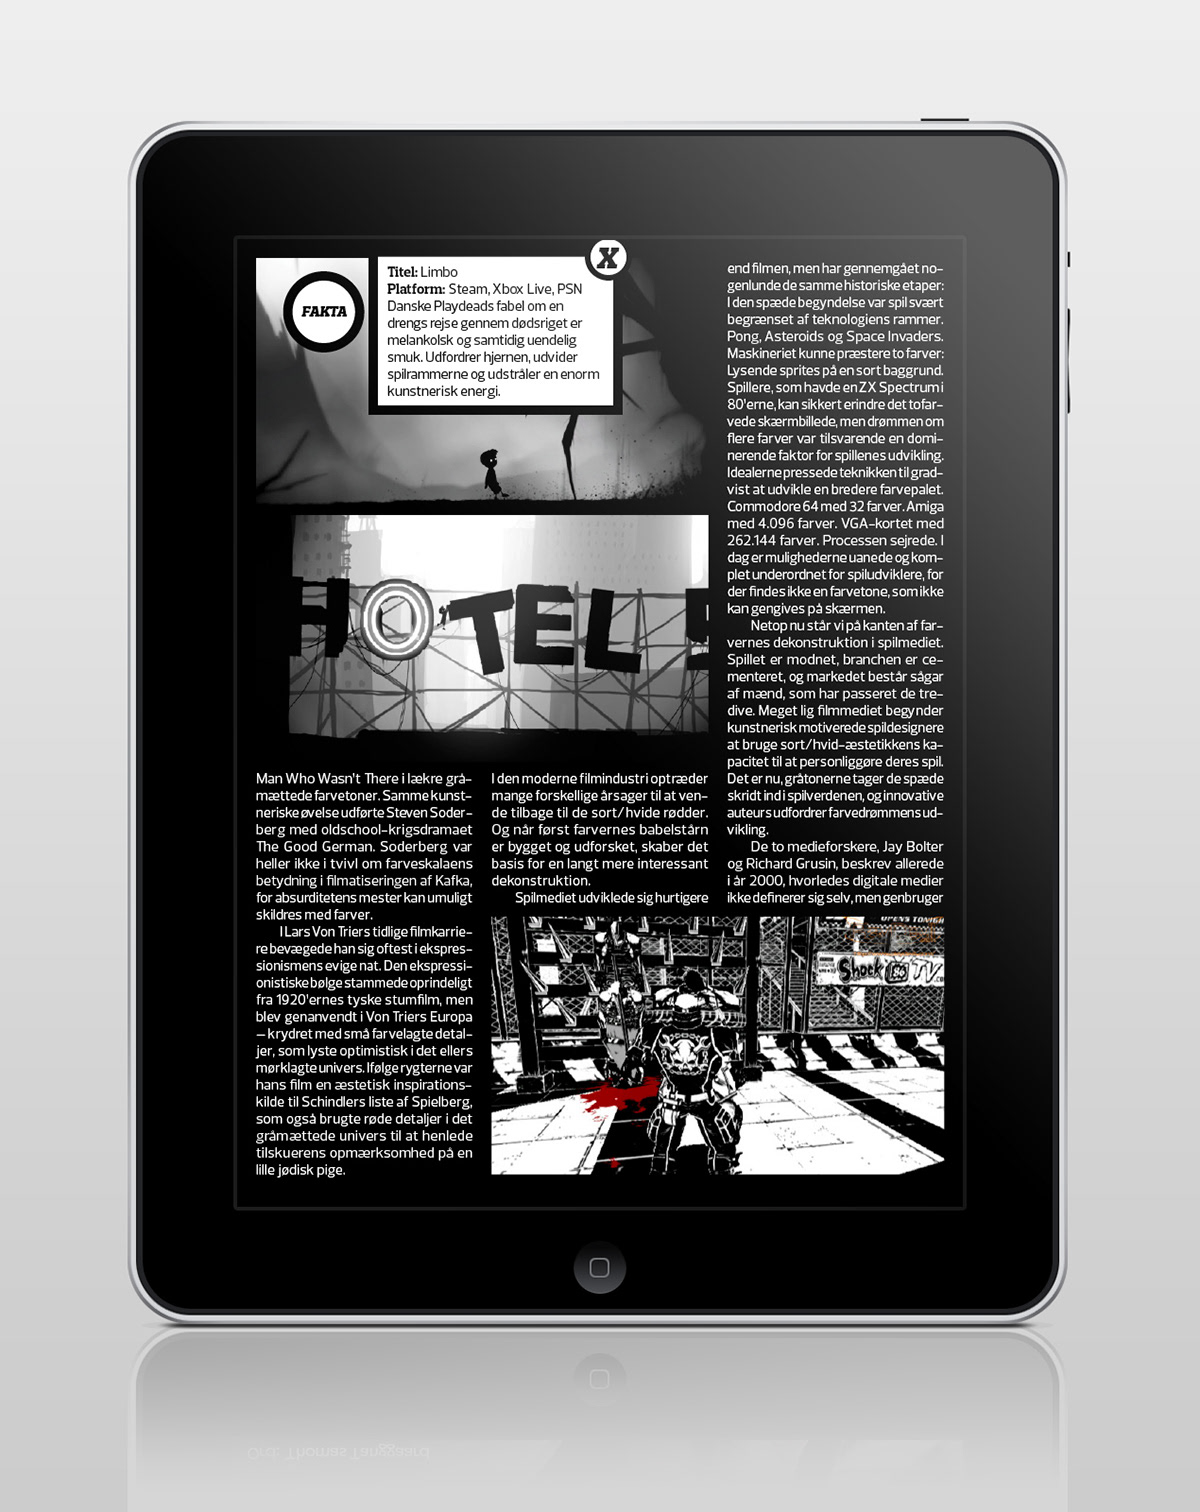 iPad  Magazine   hyped  animation  after effects  editorial design